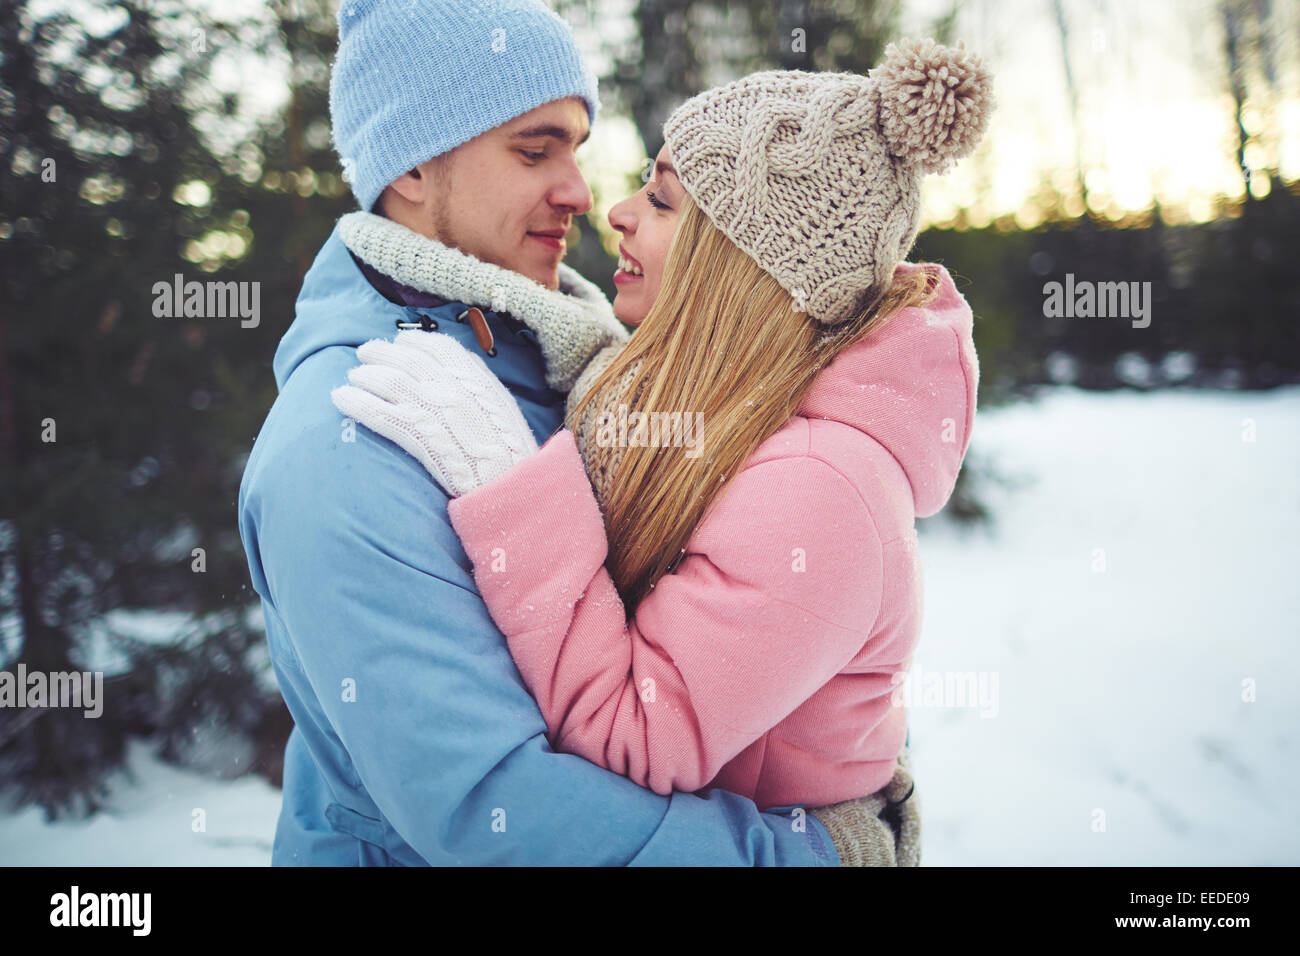 Amorous couple in embrace looking at one another in park Stock Photo